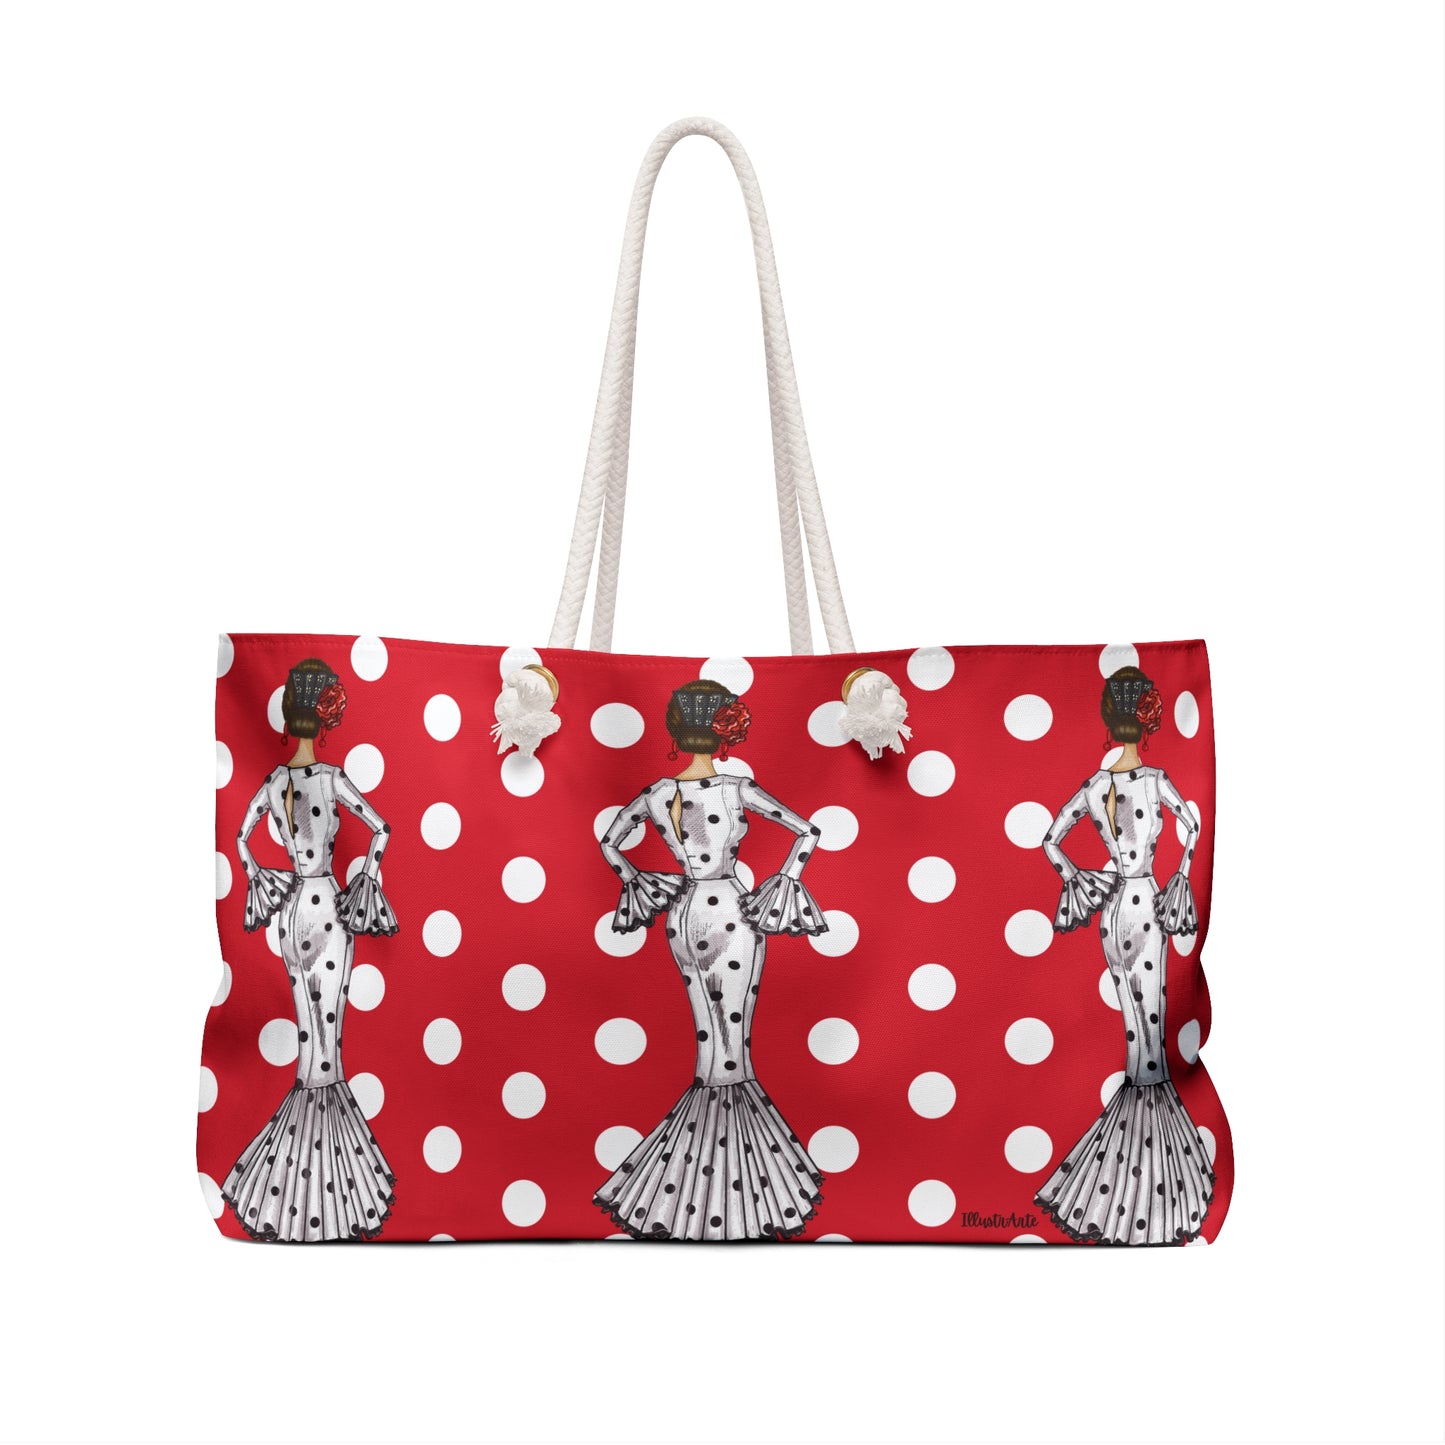 a red and white polka dot bag with a dalmatian pattern